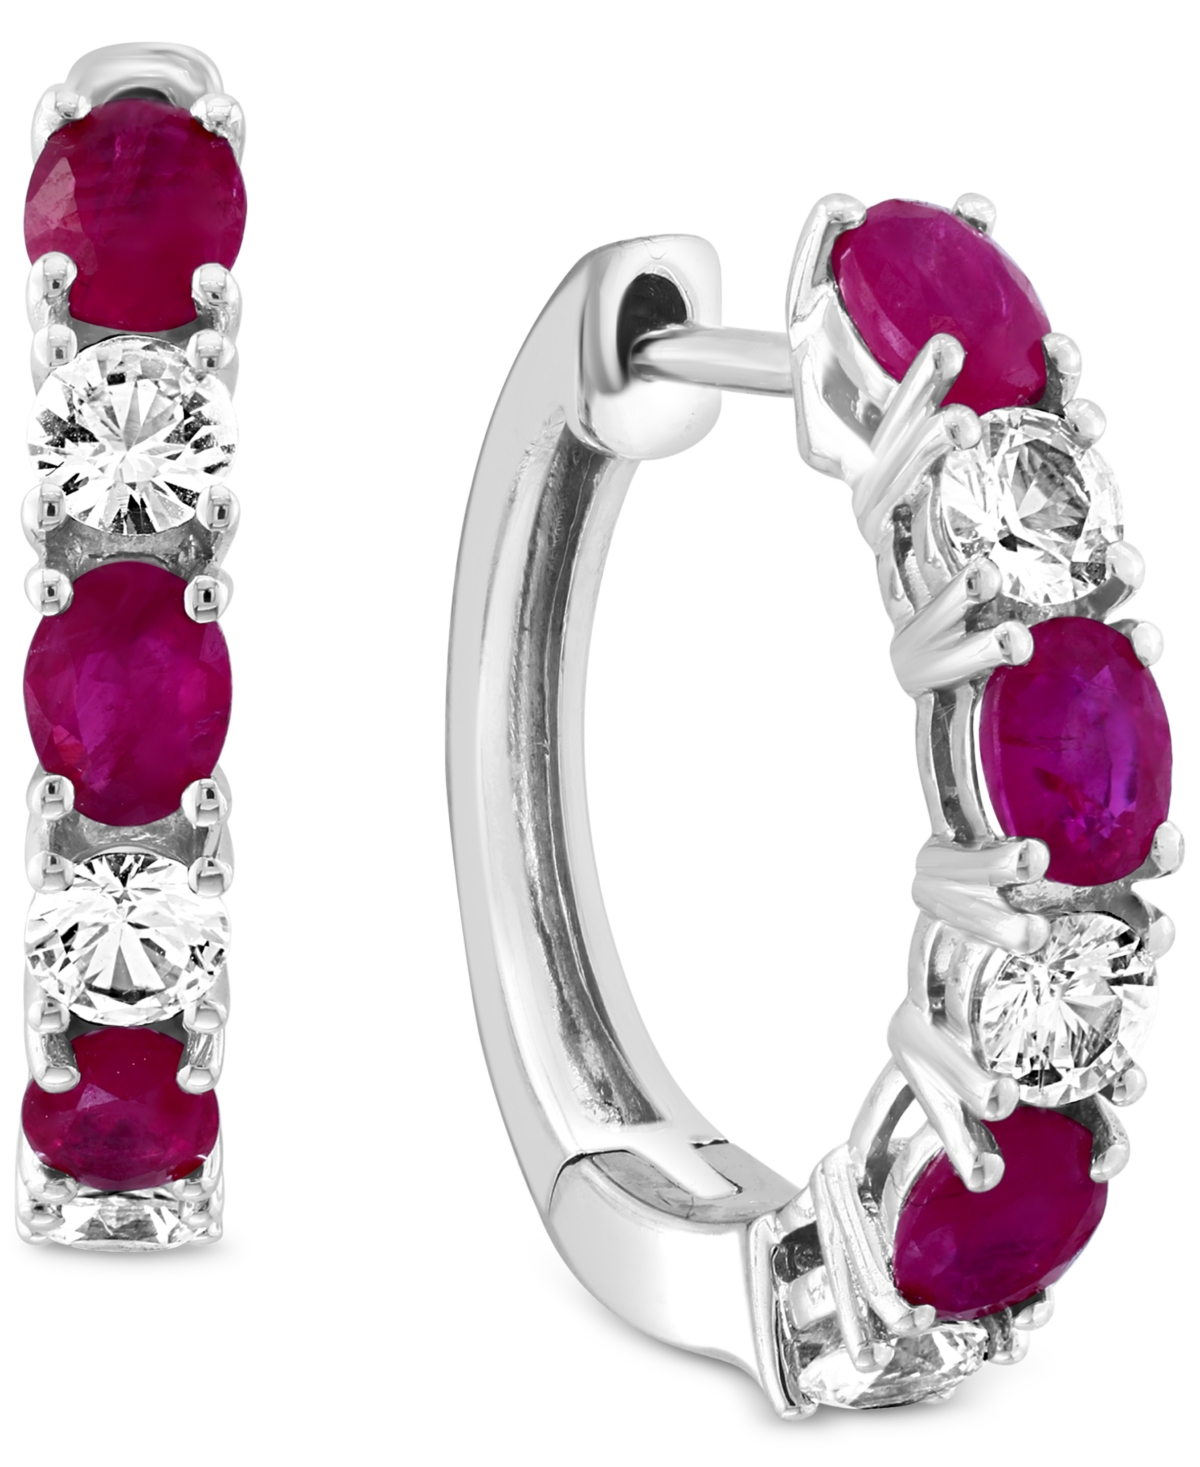 Effy Emerald (3/4 ct. t.w.) & White Sapphire (3/4 ct. t.w.) Small Hoop Earrings in 14k White Gold, 0.75" (Also available in Sapphire and Ruby) - Ruby